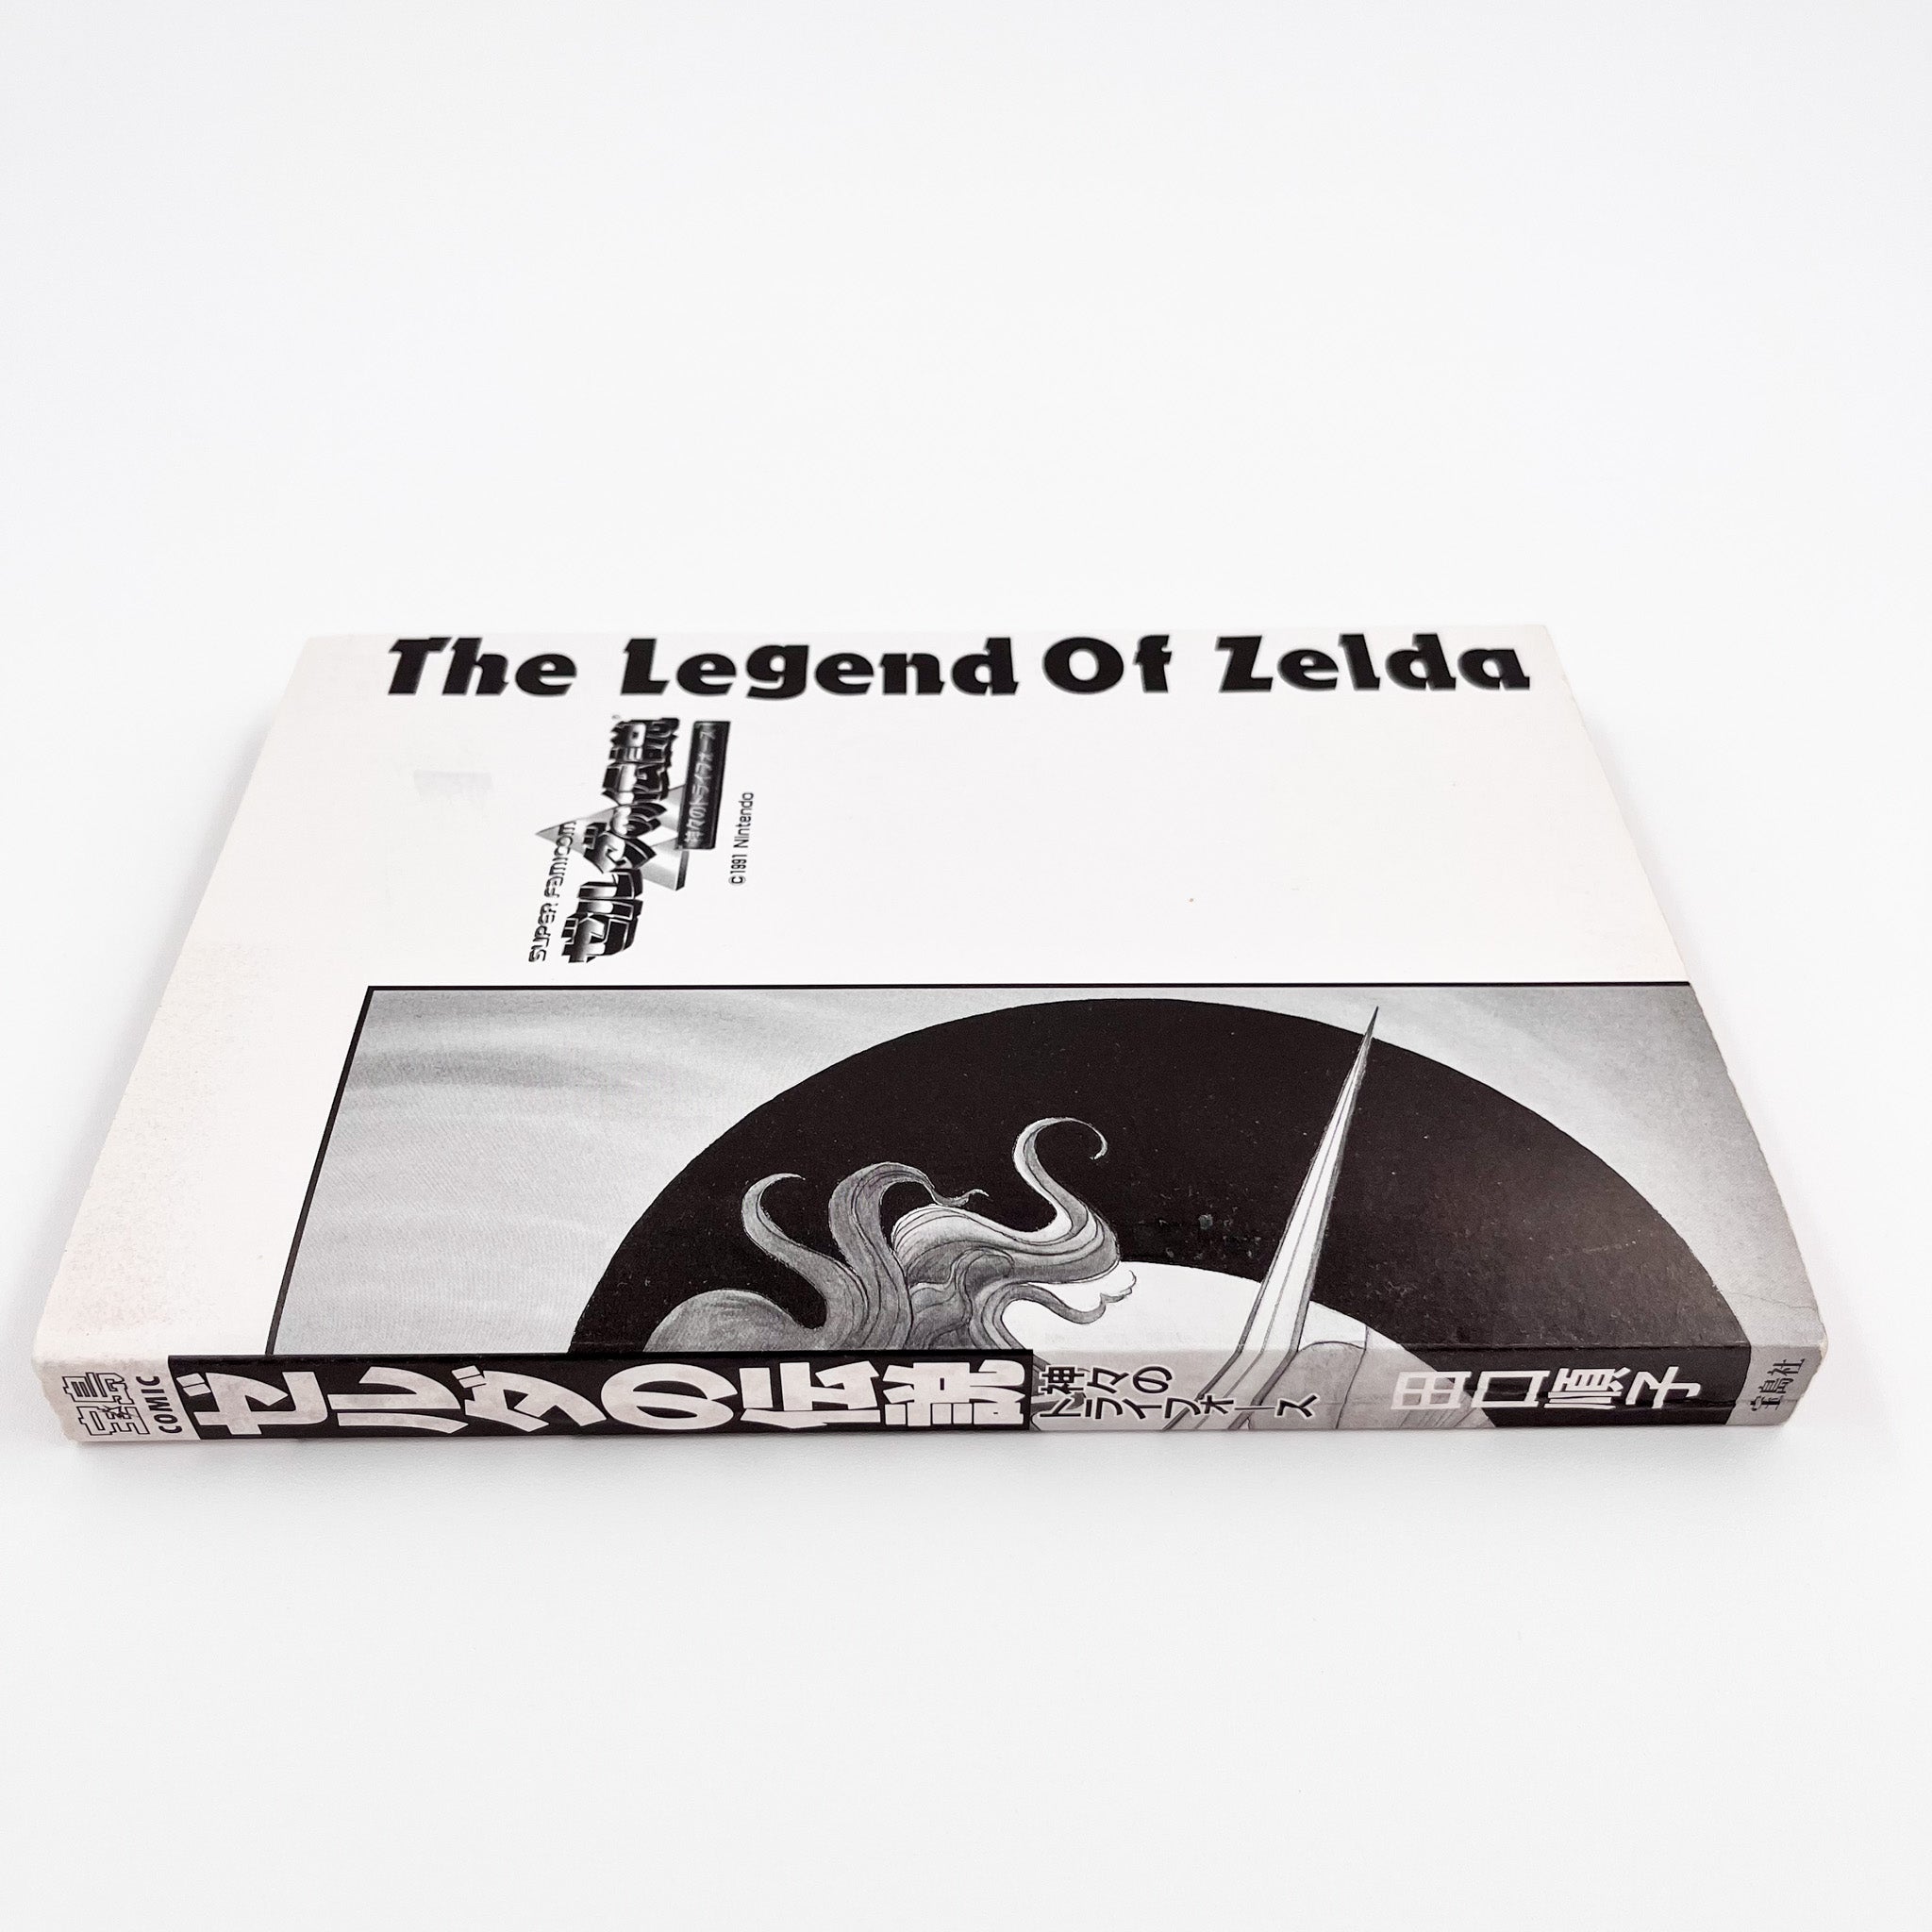 The Legend of Zelda: A Link to the Past by Junko Taguchi (1993)